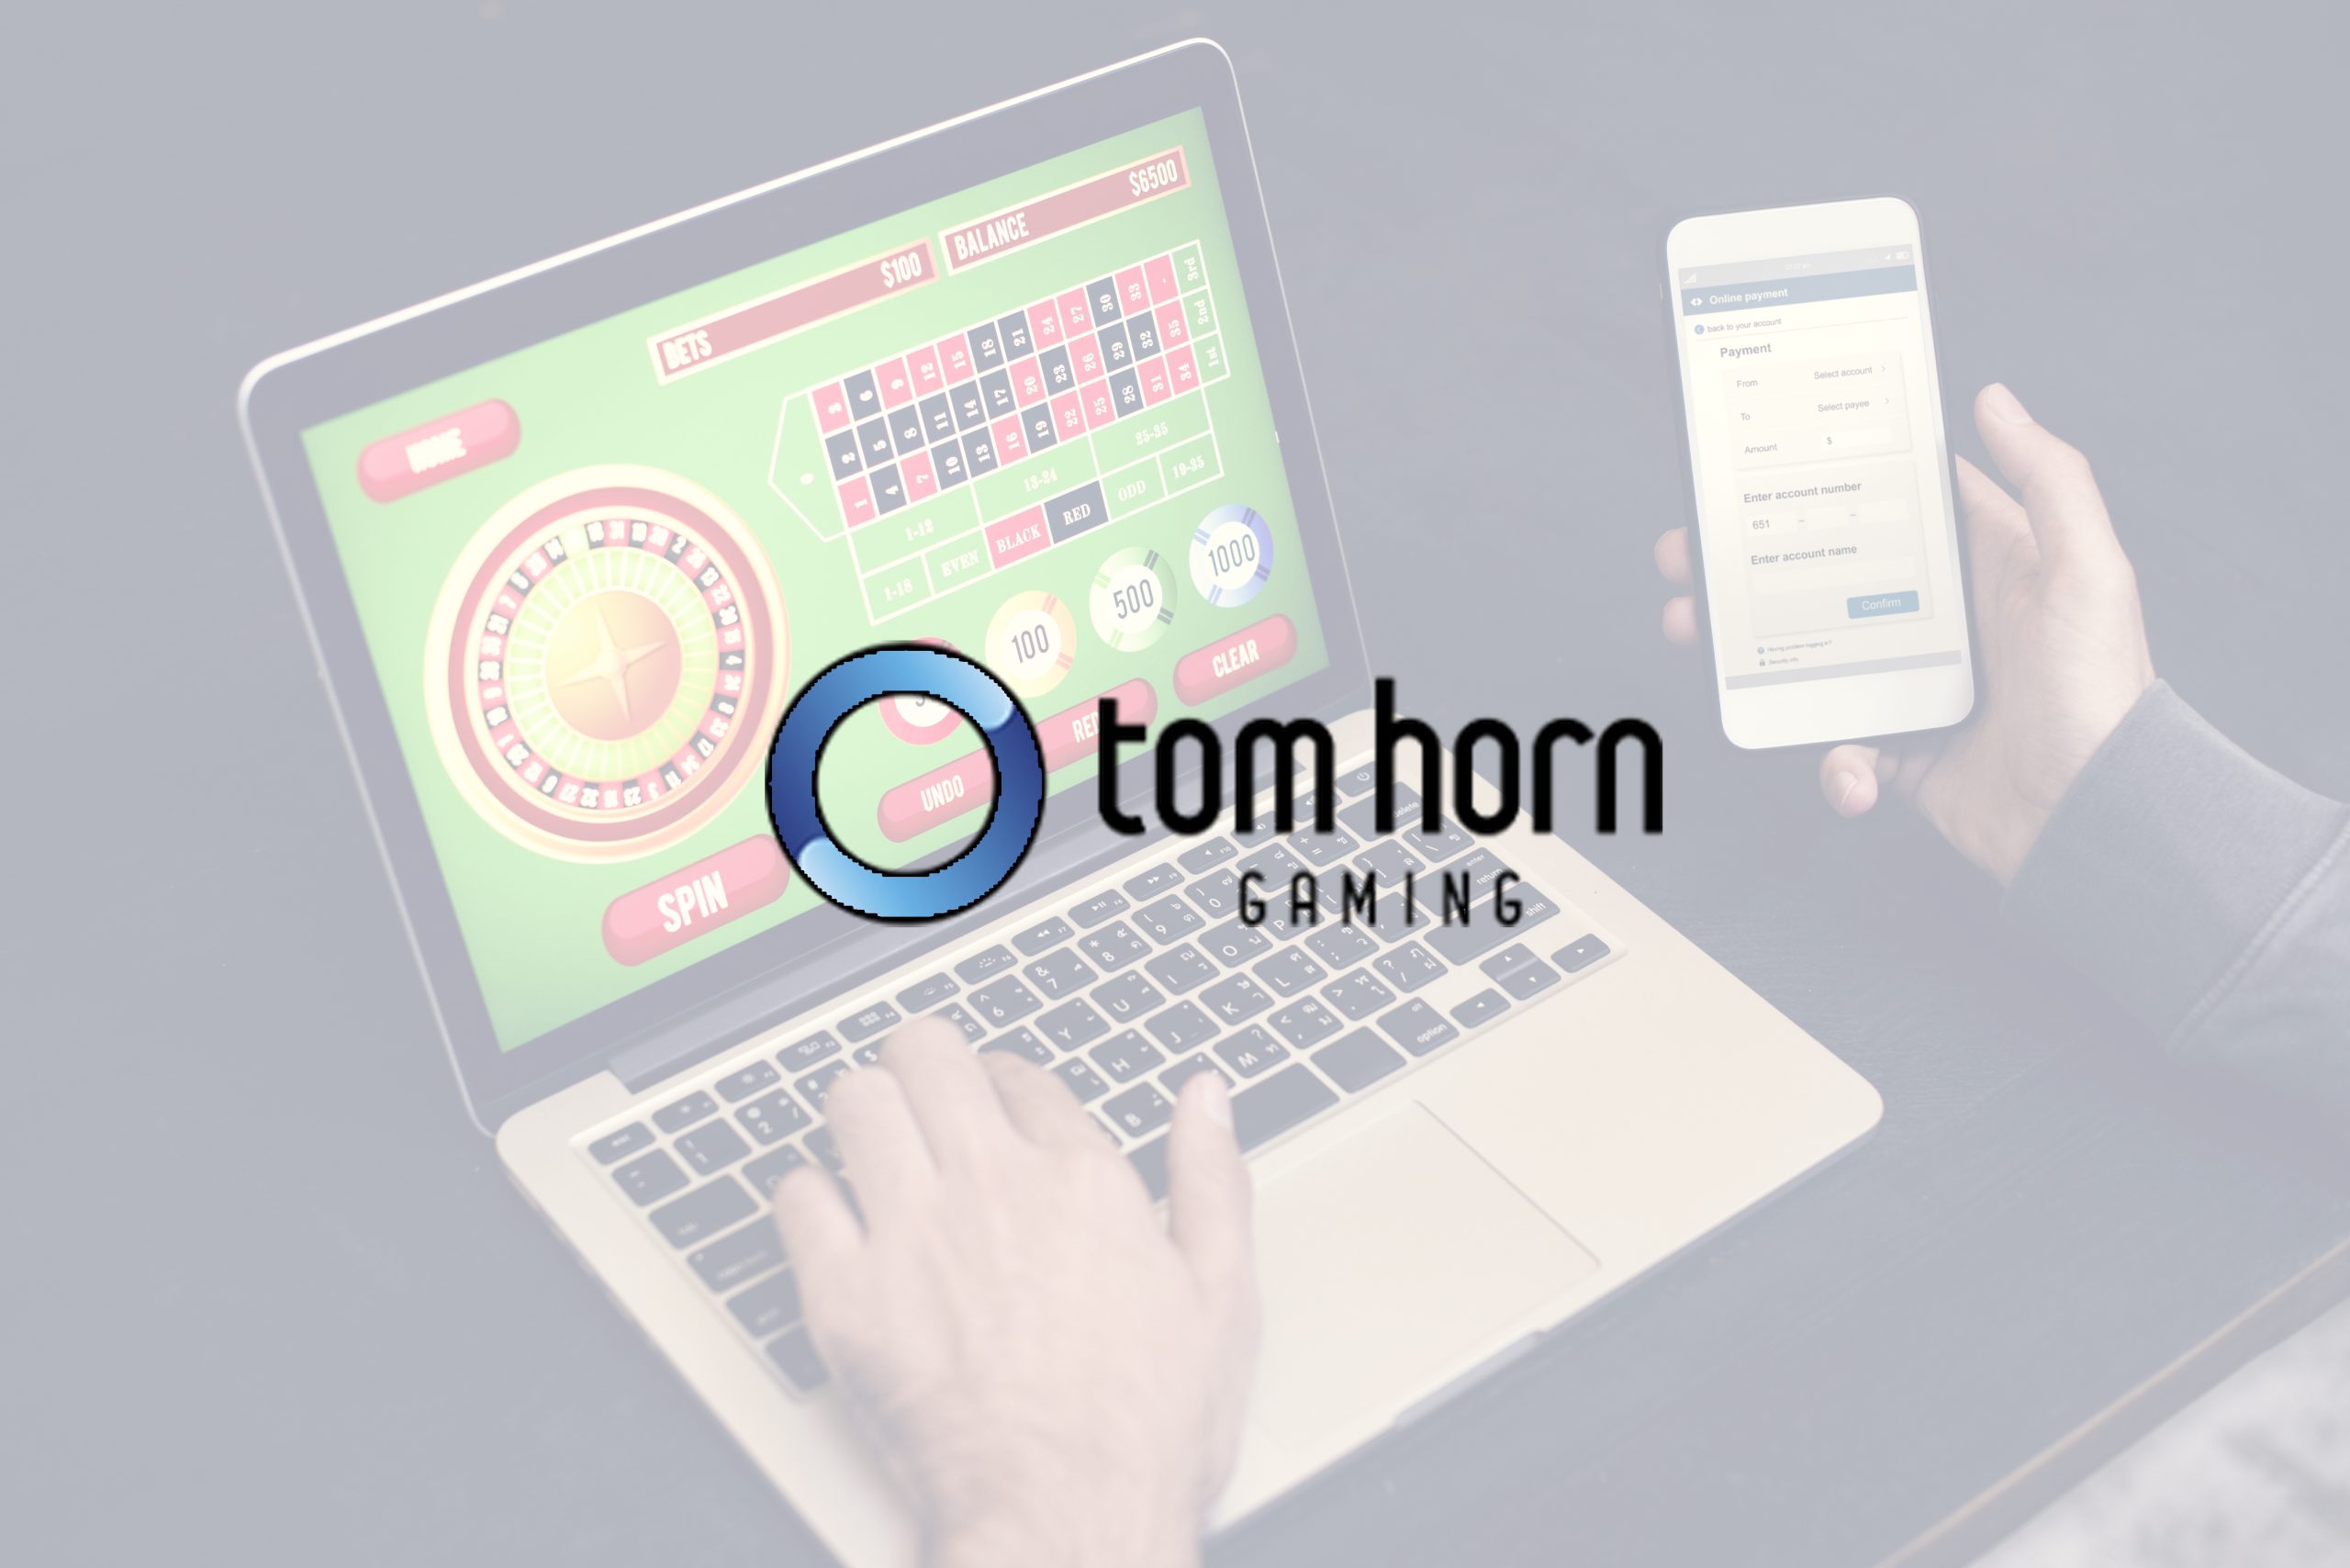 Tom Horn Gaming Not On Gamstop